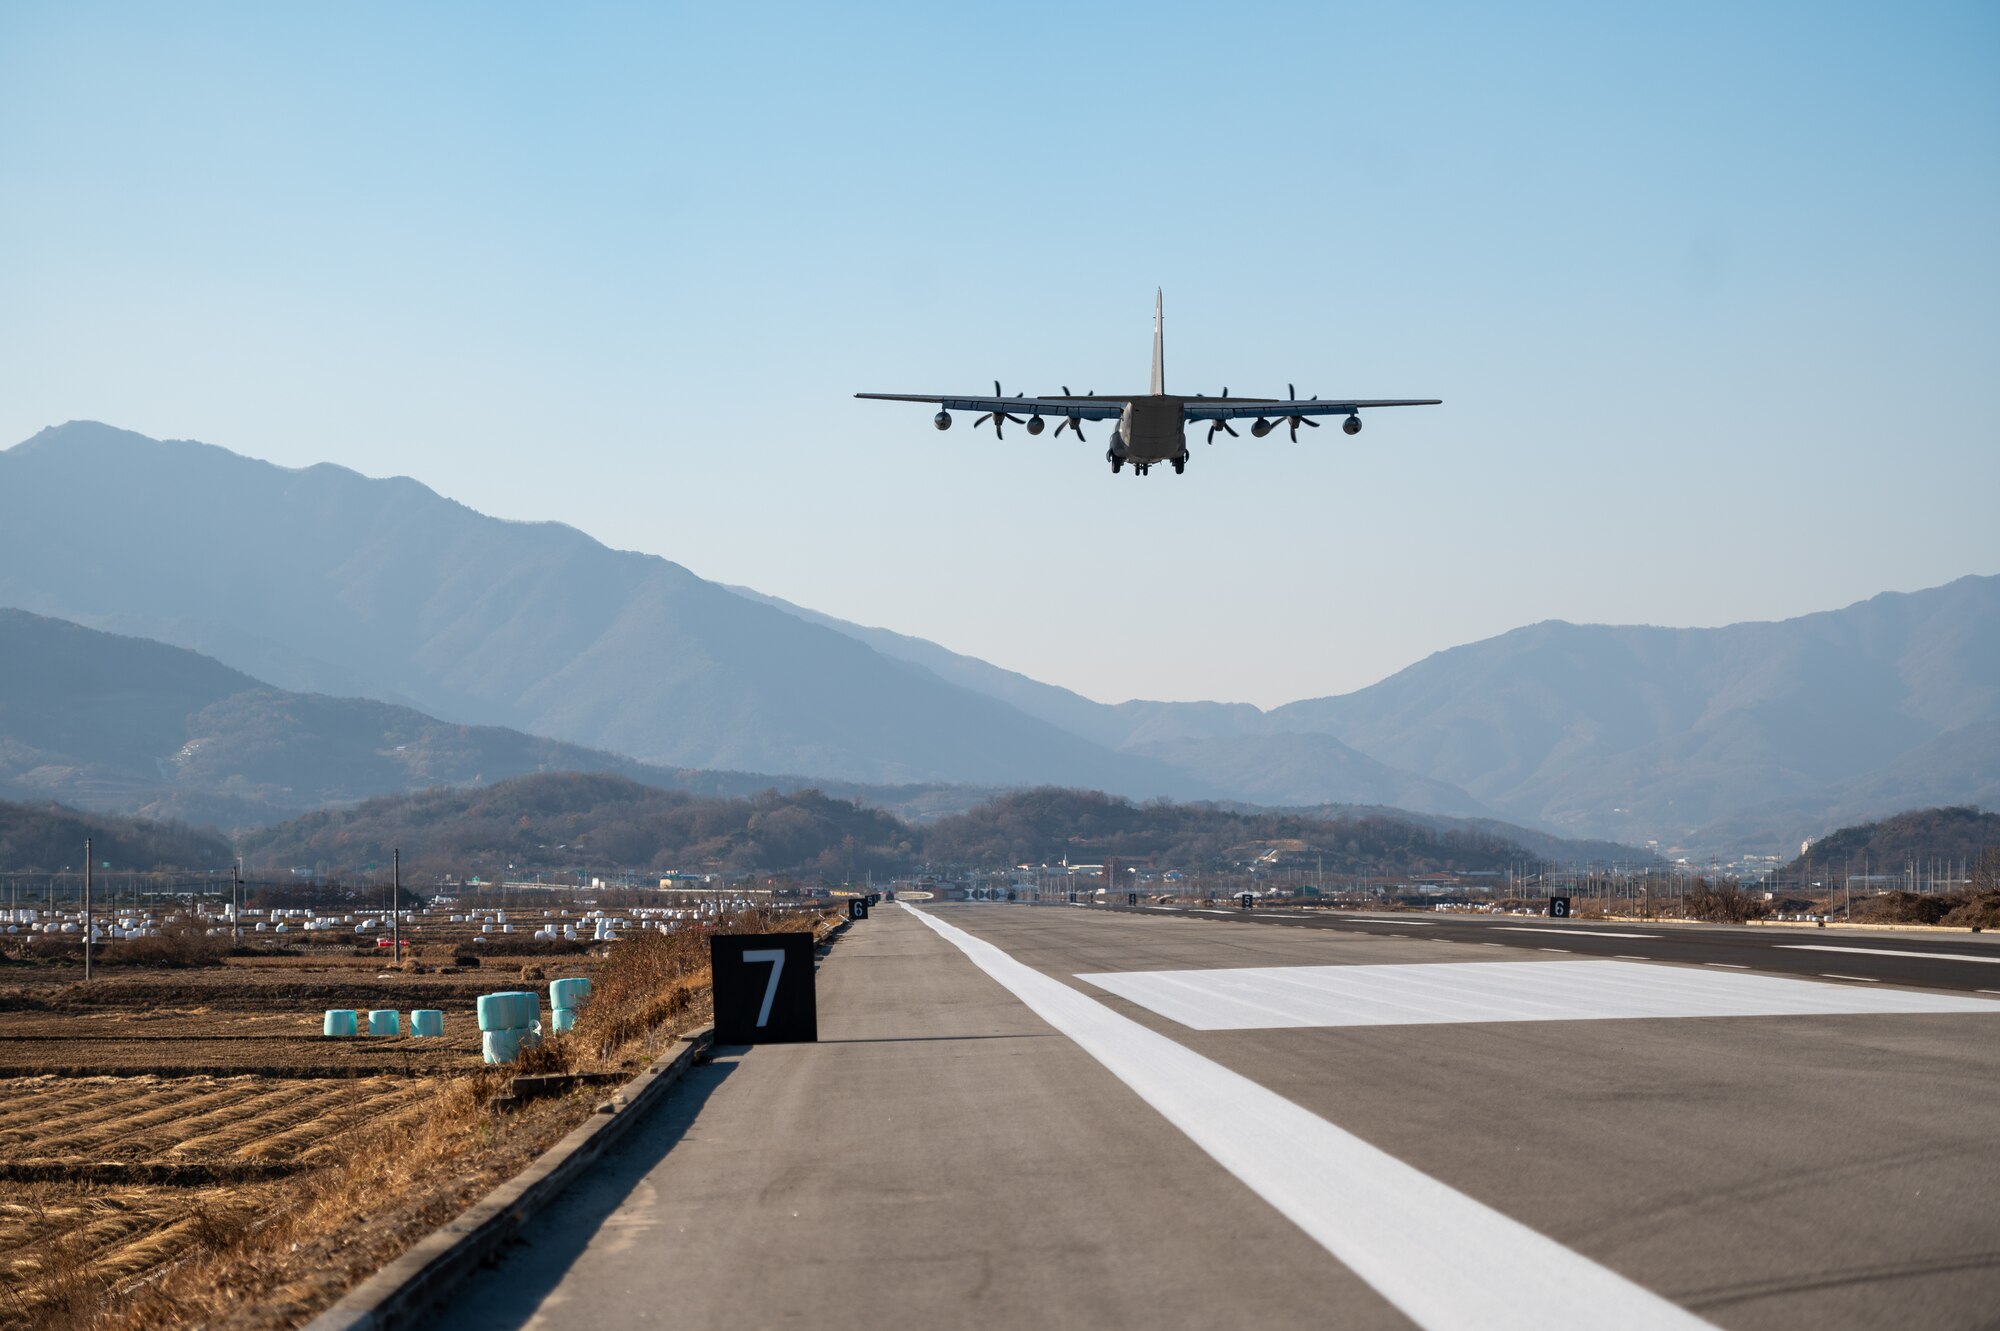 A U.S. Air Force MC-130J Commando II takes off after performing a low approach at an emergency landing strip as part of a combined training event involving USAF and Republic of Korea Air Force partners